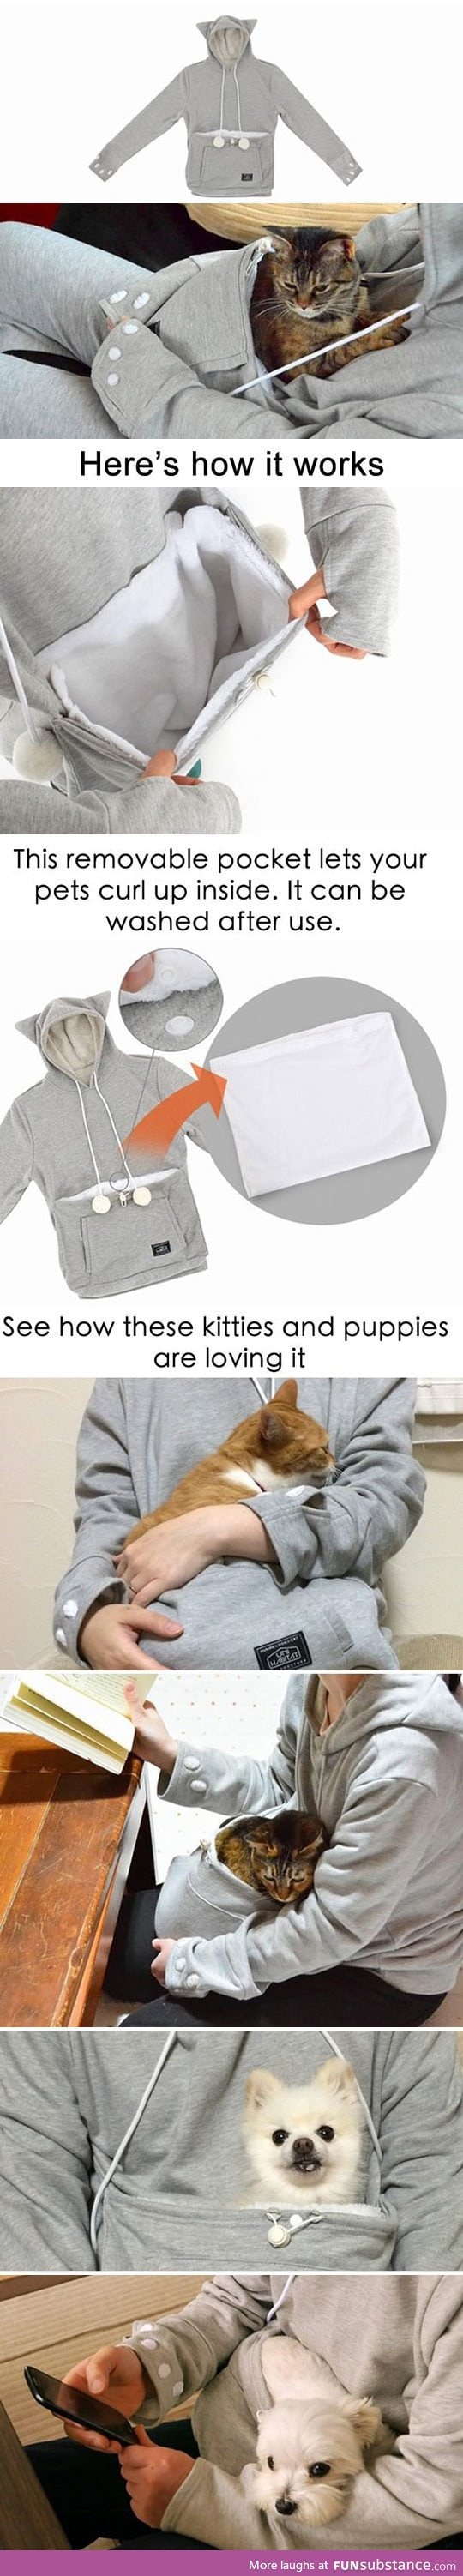 A jacket for carrying your pets